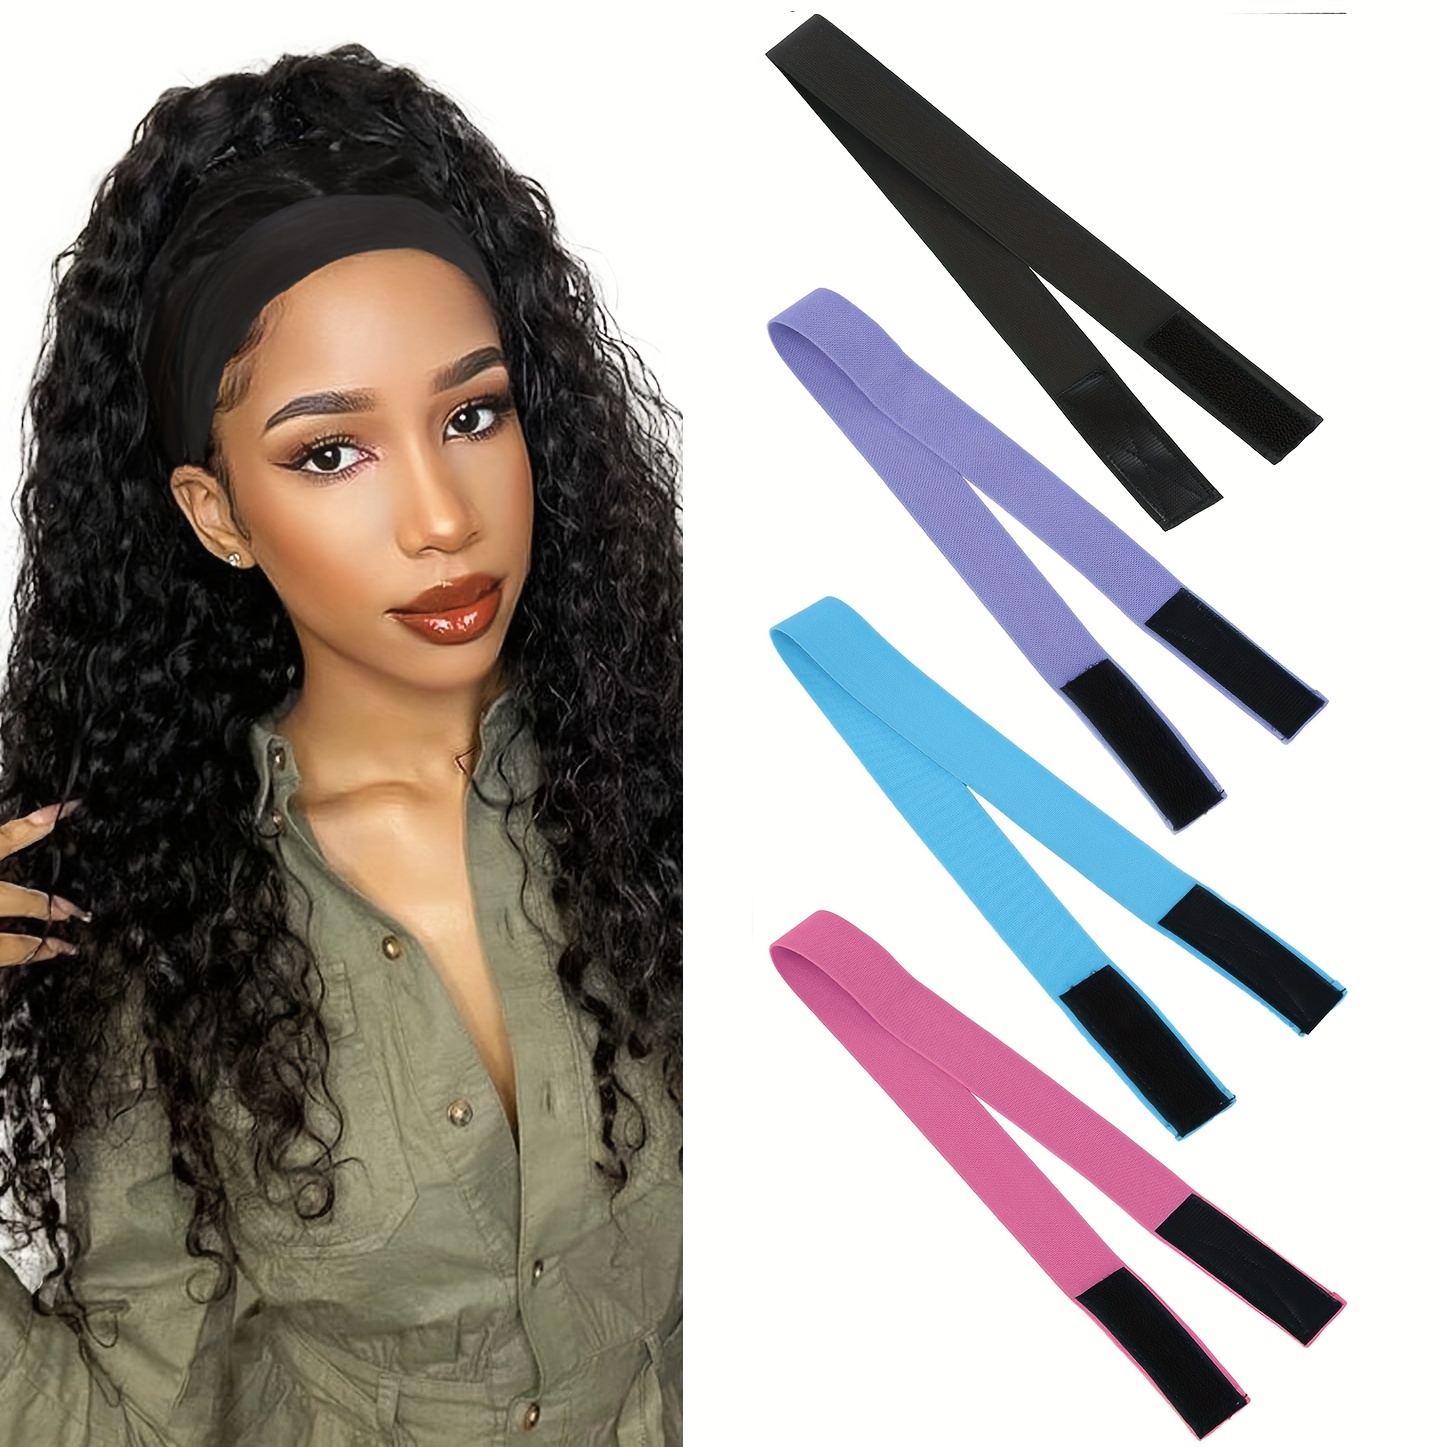 Lace Melting Bands For Lace Front Wigs Adjustable Hair Elastic Band For A  Perfect Lay 1 PCS